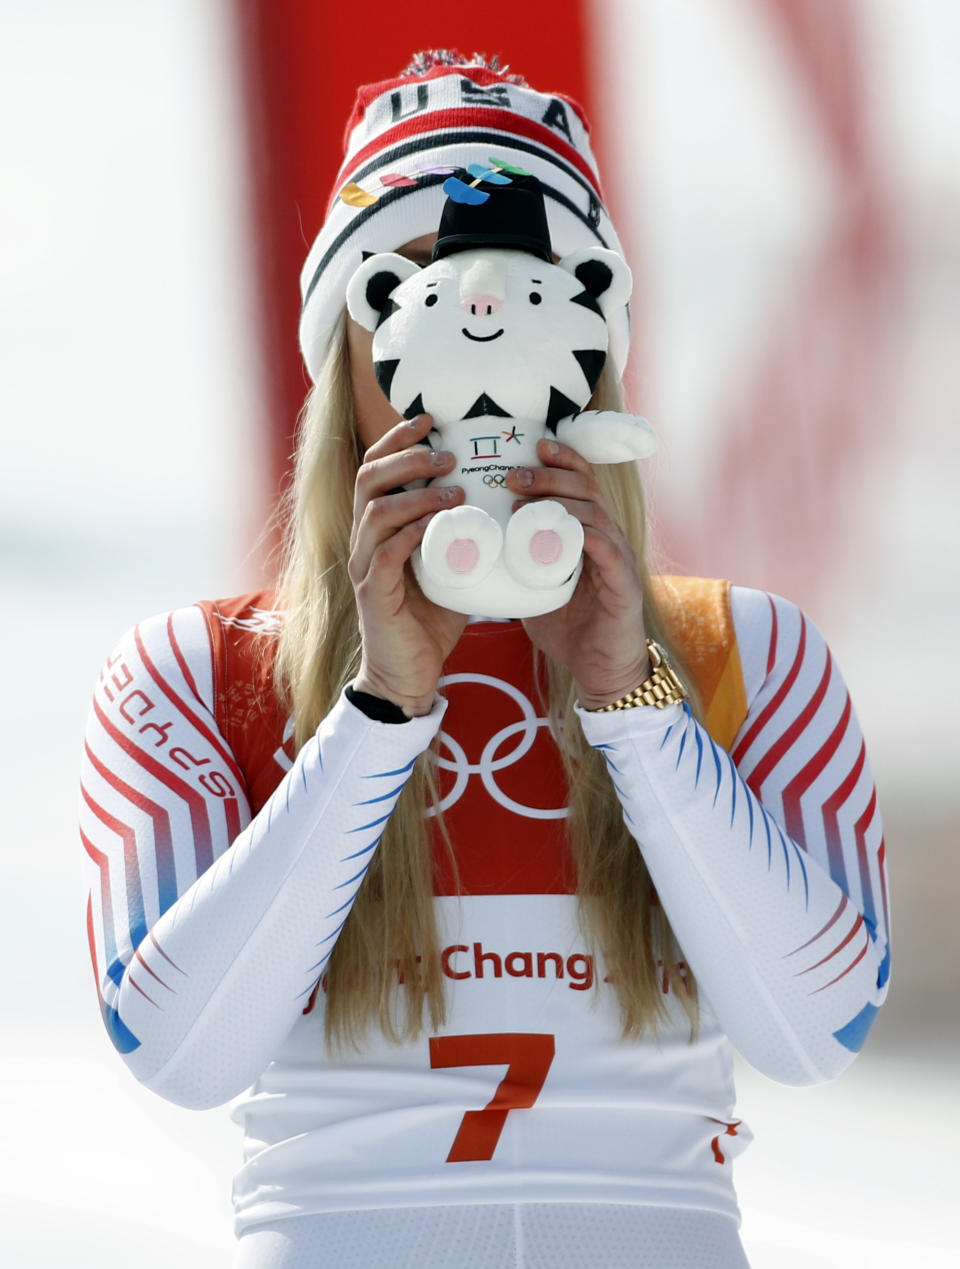 <p>Bronze medal winner Lindsey Vonn, of the United States, playfully places a stuffed Olympic mascot over her face as she celebrates during the flower ceremony for the women’s downhill at the 2018 Winter Olympics in Jeongseon, South Korea, Wednesday, Feb. 21, 2018.(AP Photo/Christophe Ena) </p>